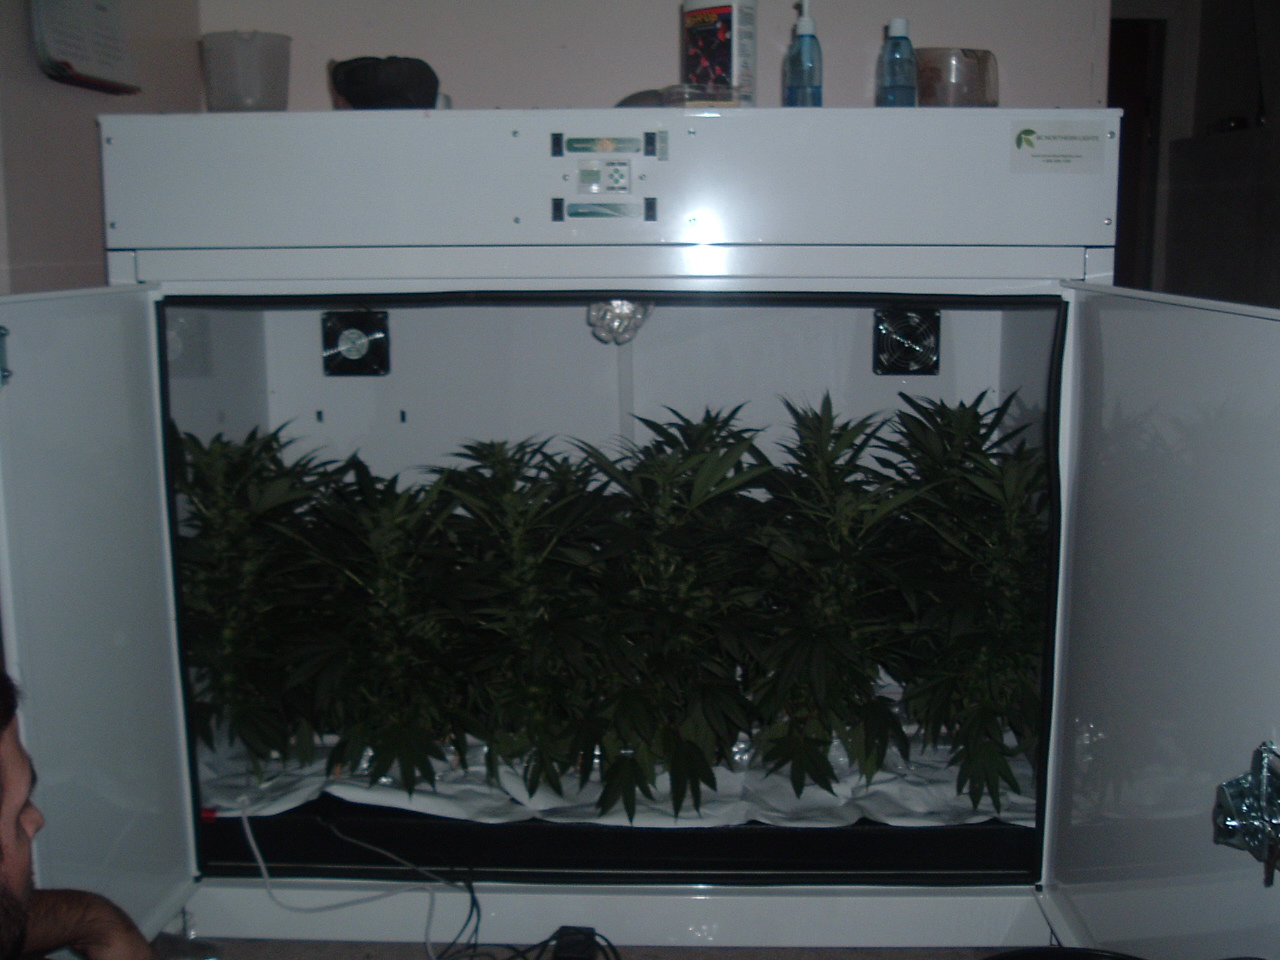 [day+21+only+3+weeks+of+flowering+and+noy+much+space+is+left+to+fill.jpg]